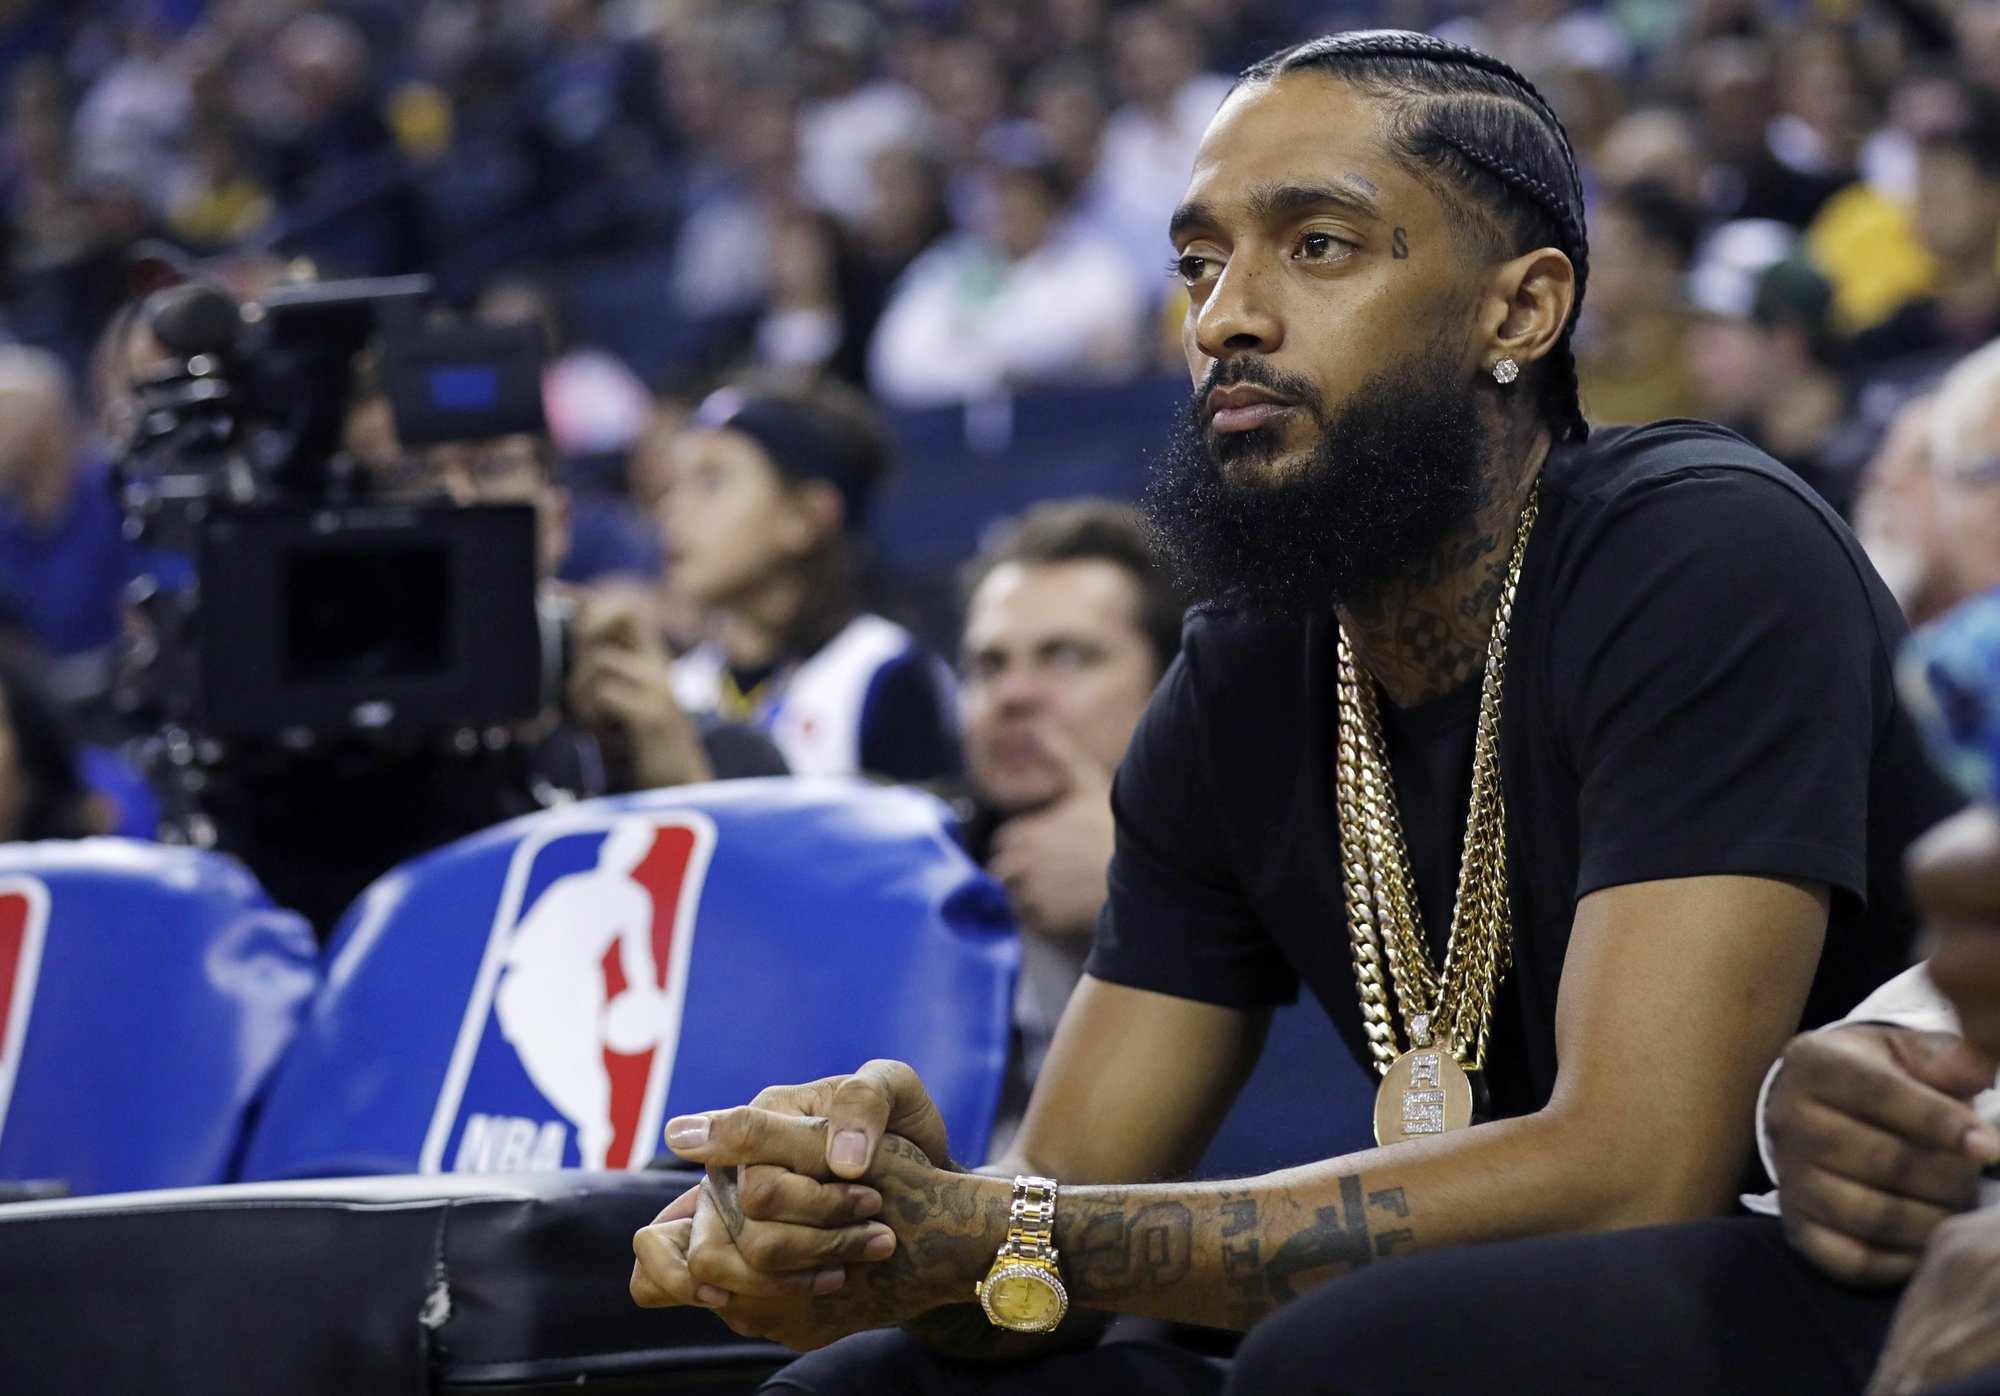 My City - Officials say rapper Nipsey Hussle shot and killed at 33